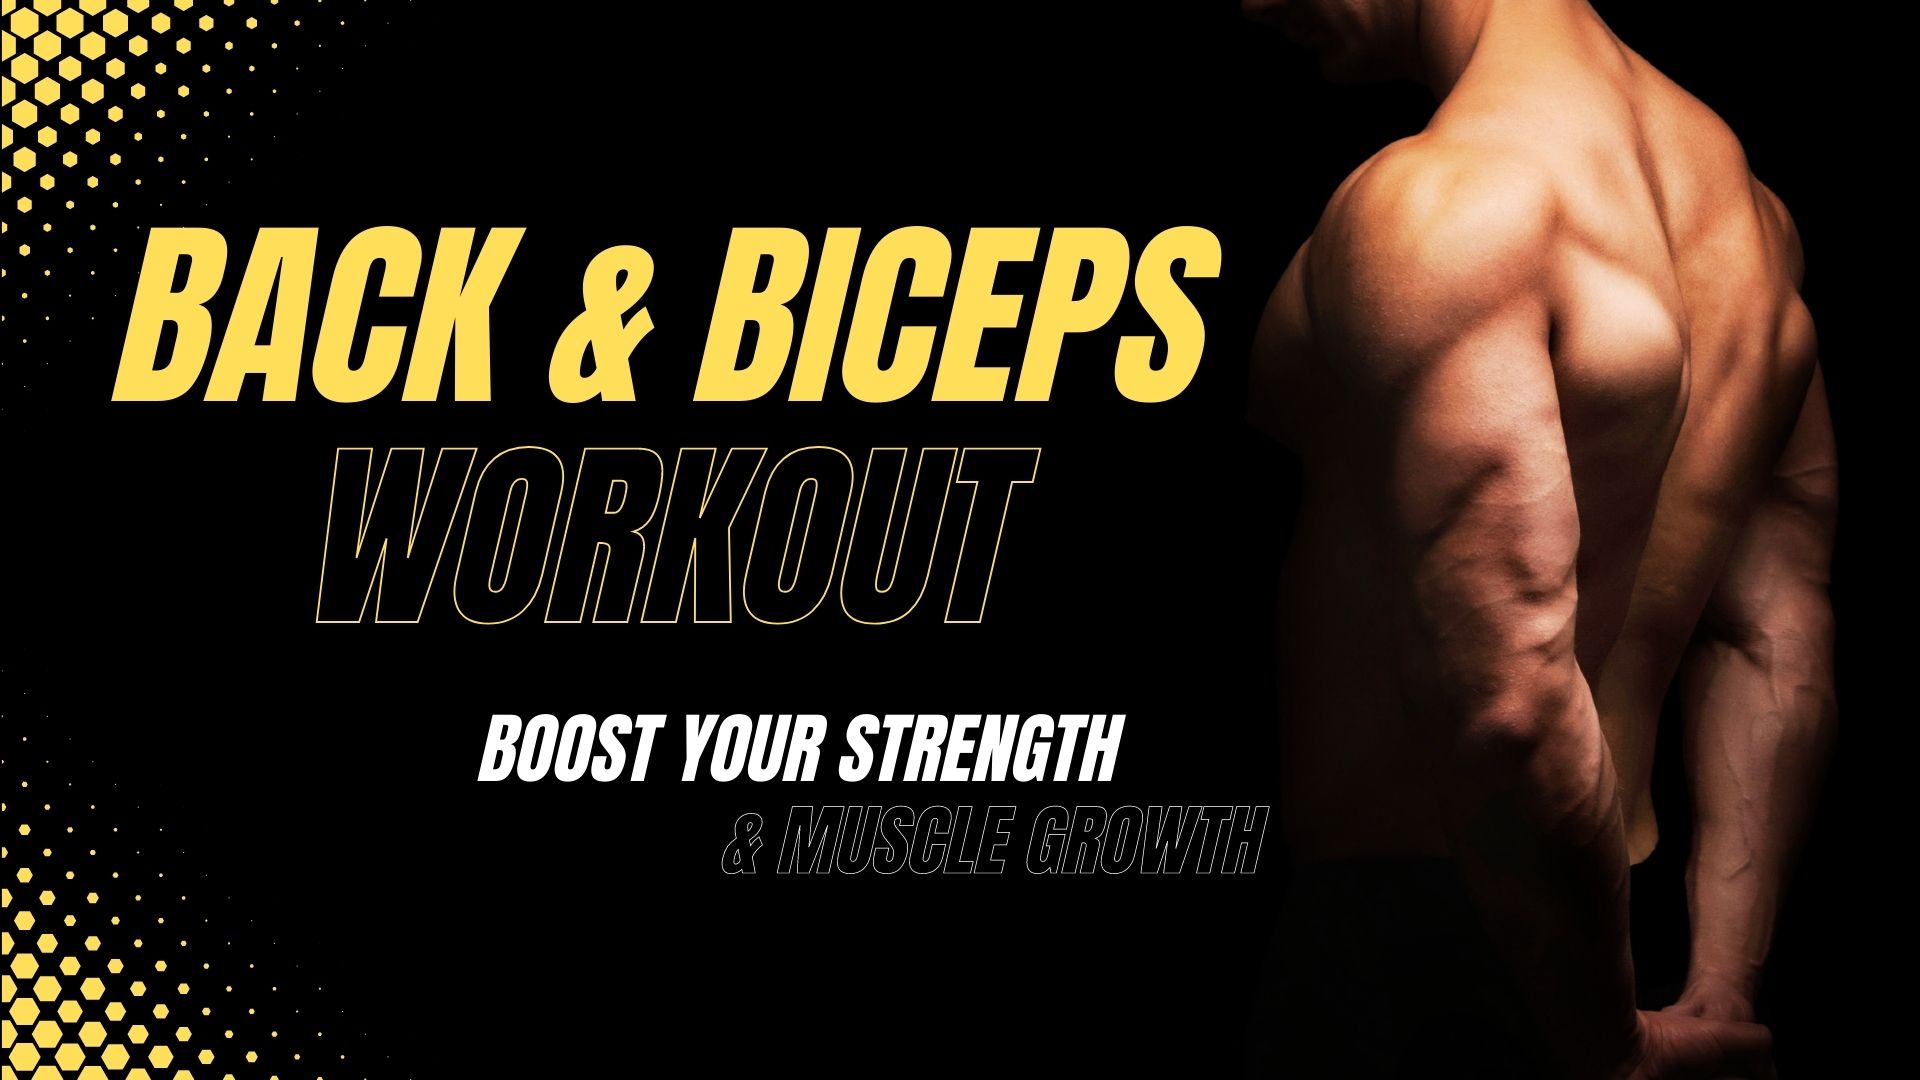 Back And Biceps Workout Strength Muscle